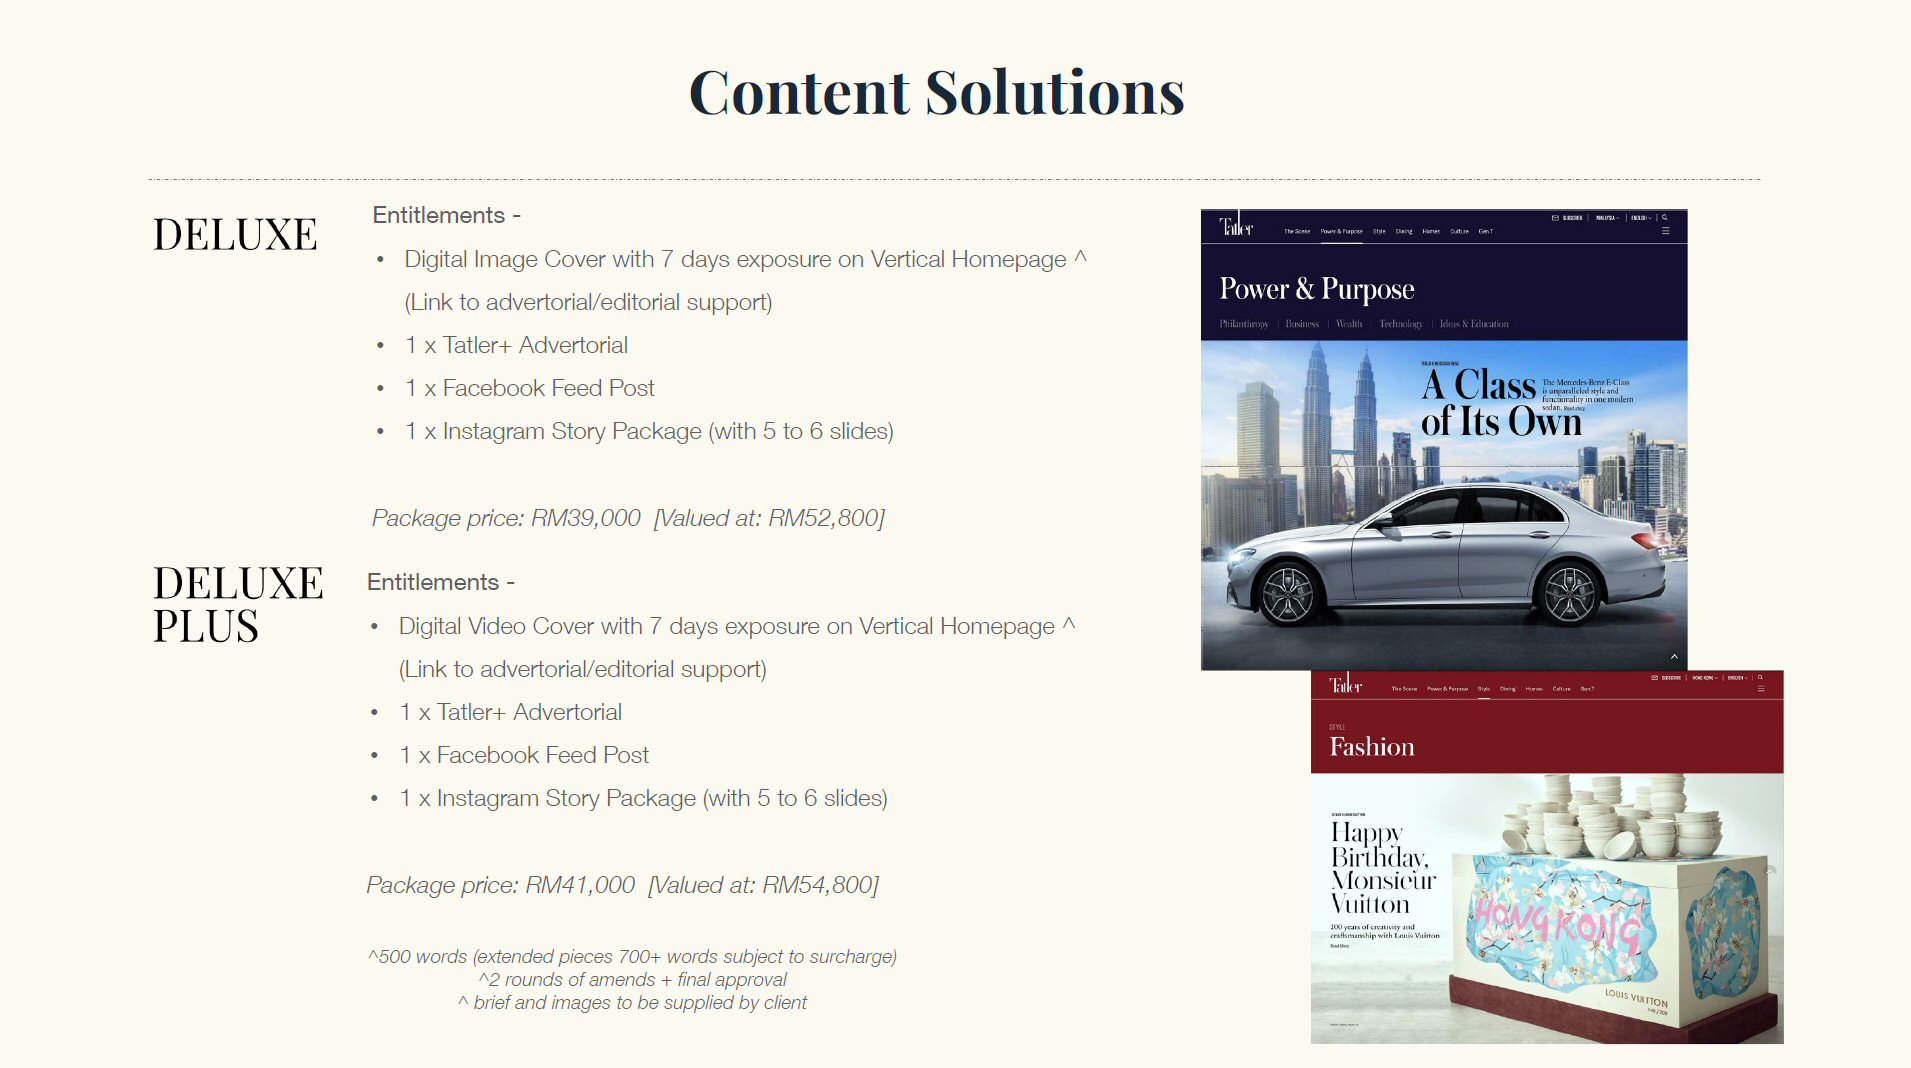 Tatler Malaysia Content Solutions: Deluxe & Deluxe Plus